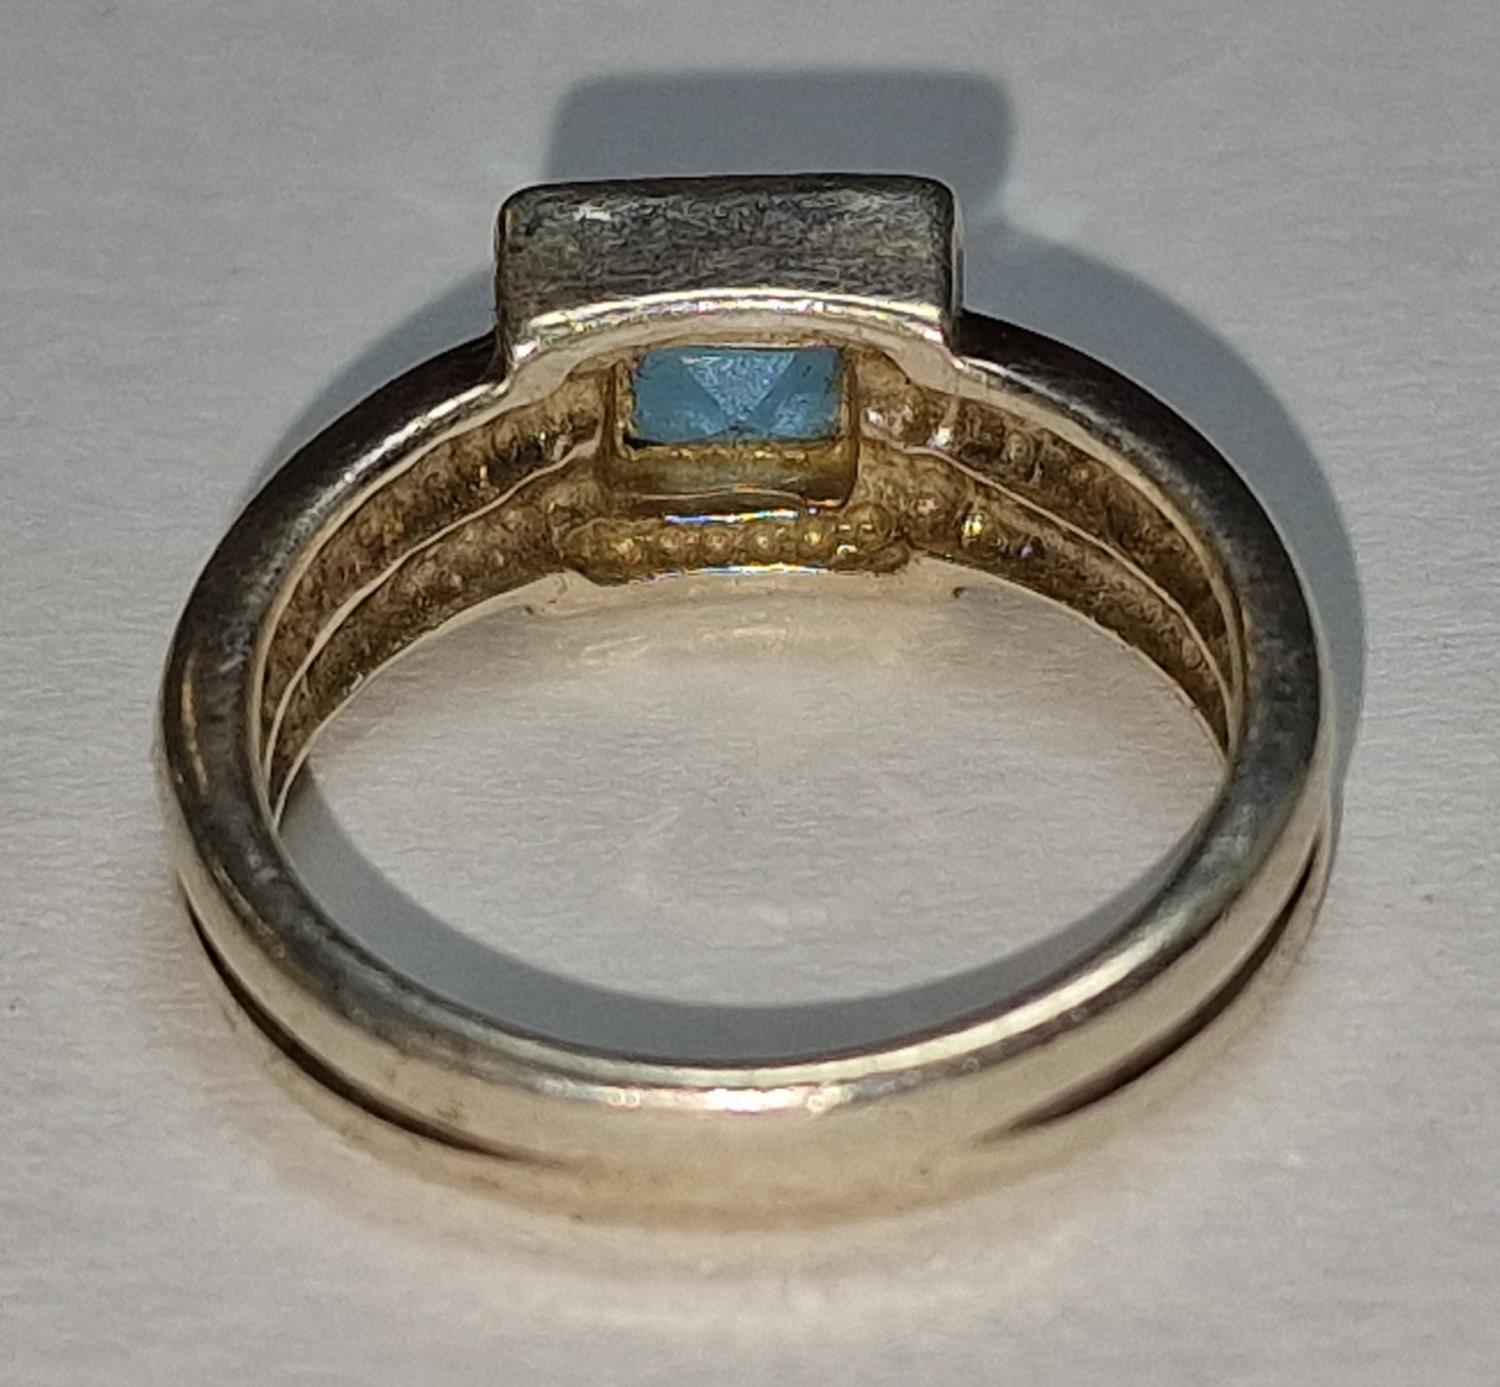 A 925 silver and square cut blue stone ring Size M - Image 3 of 3